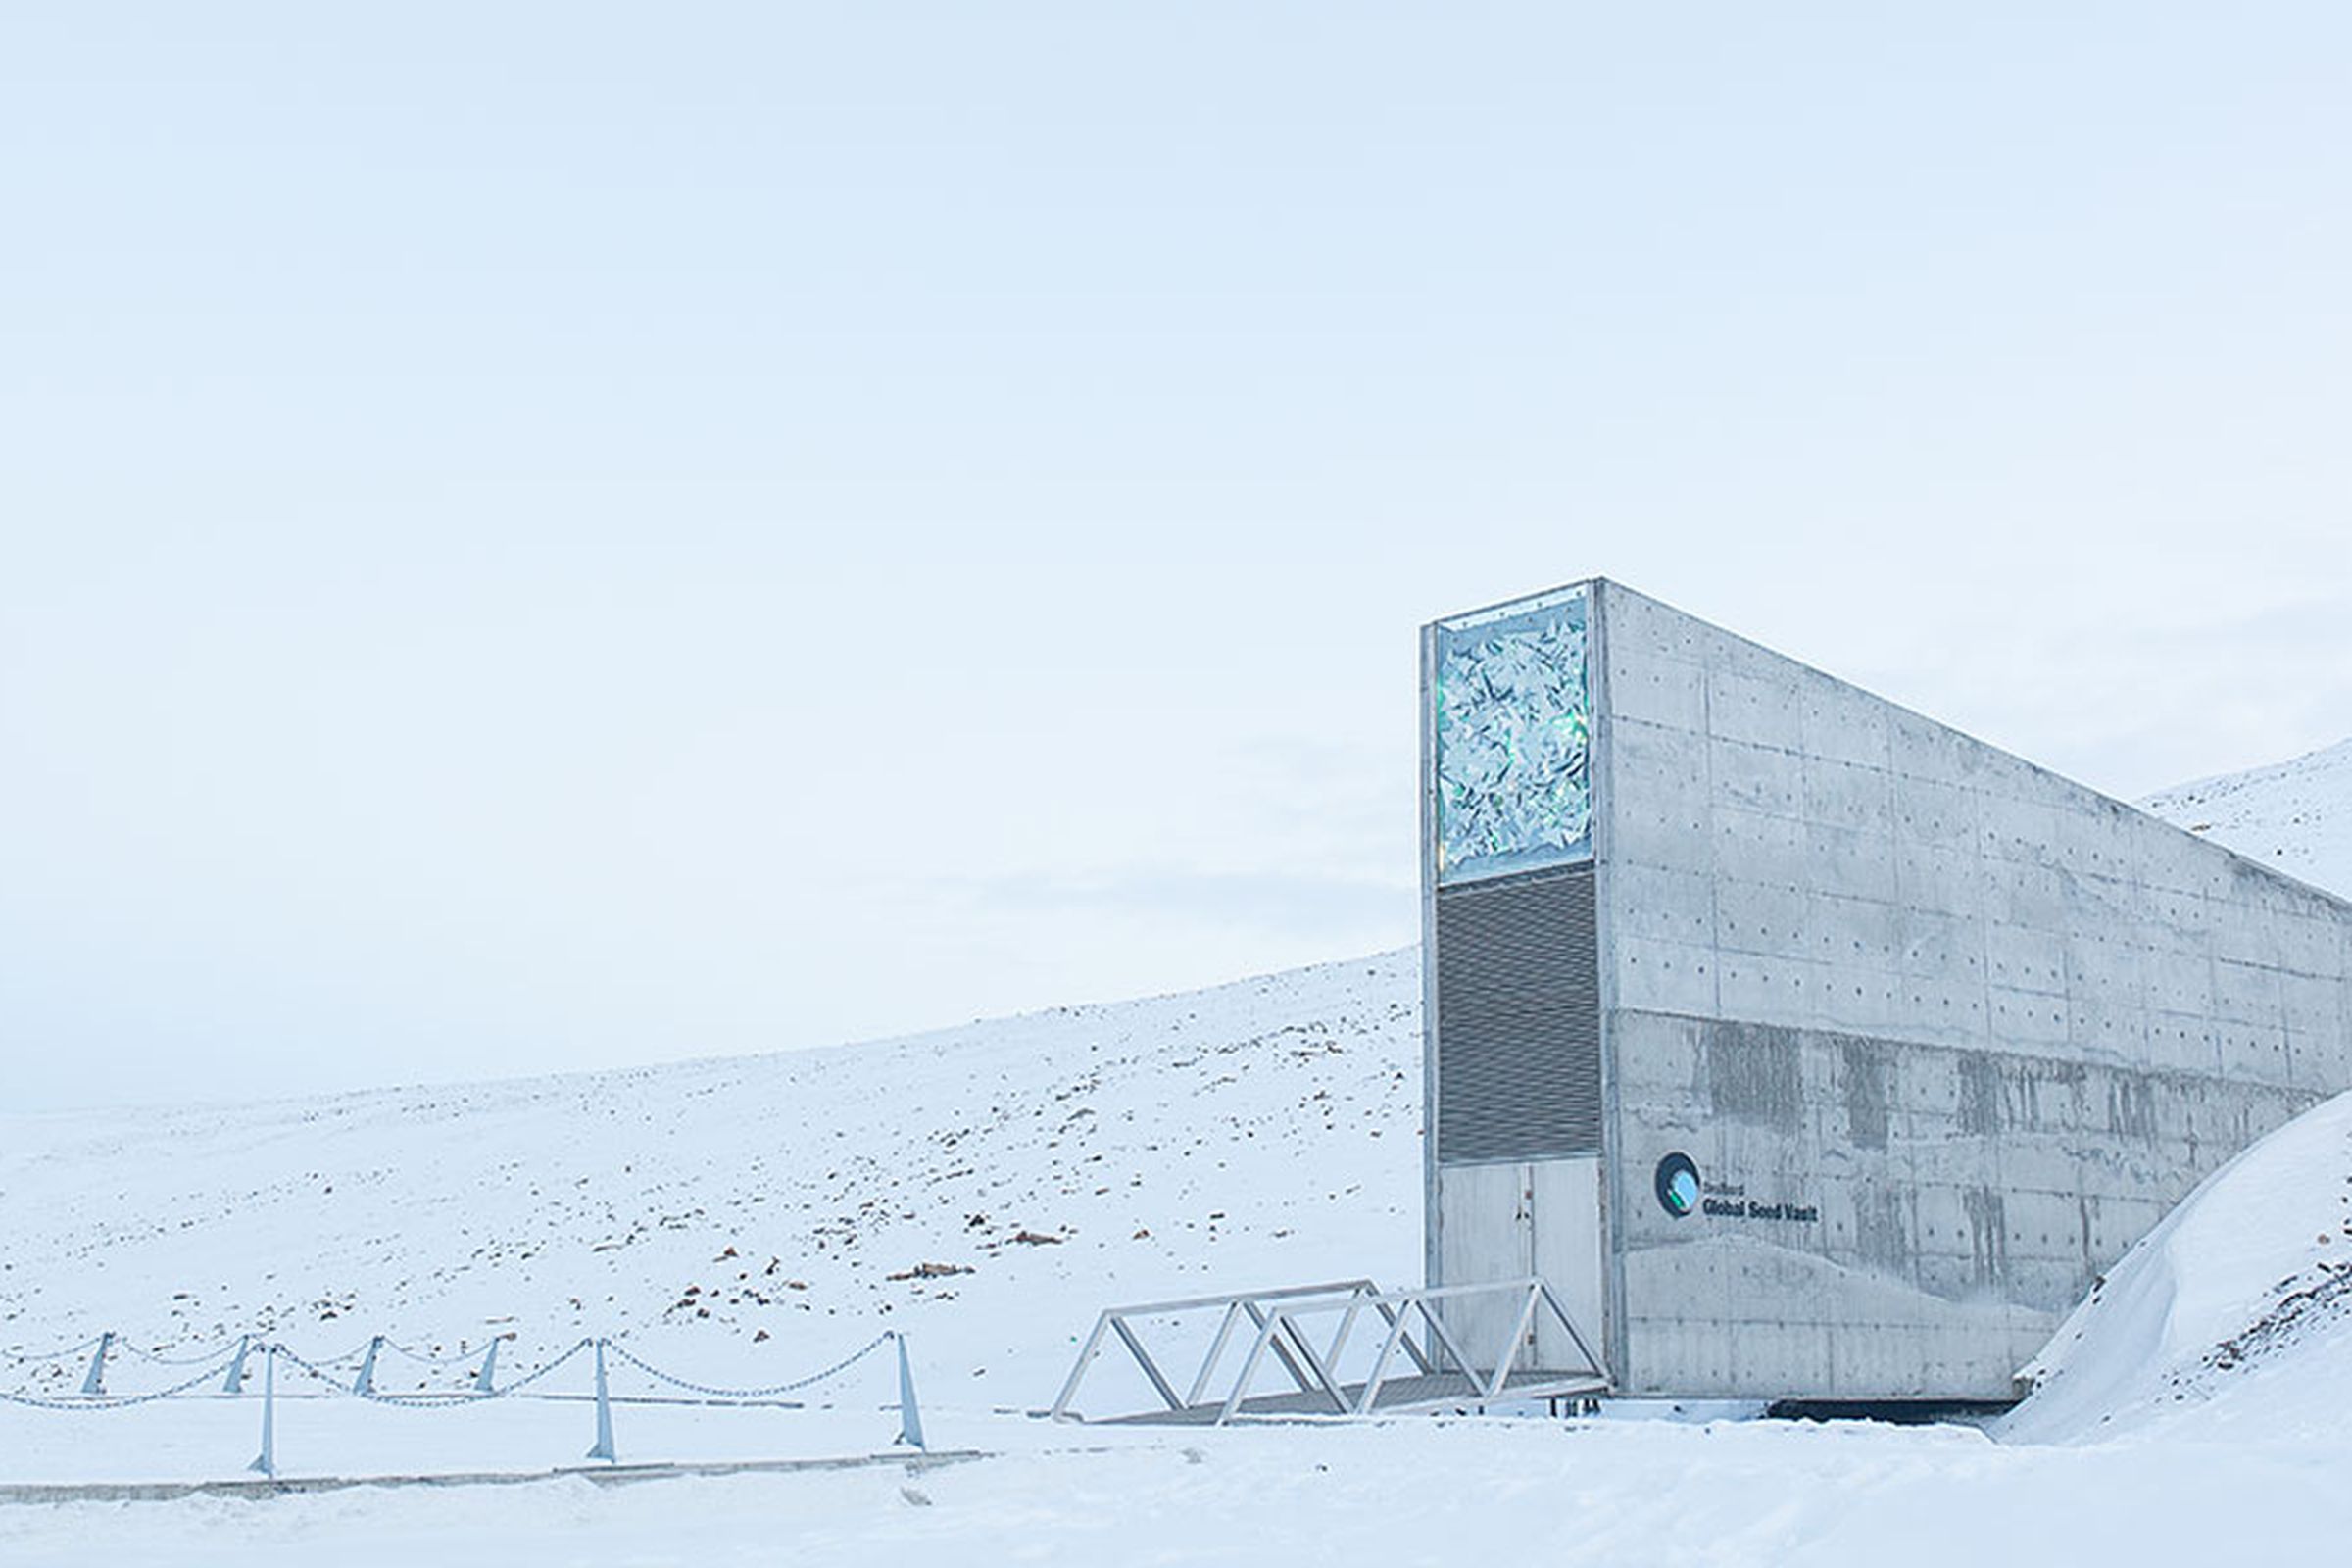 The Svalbard Golbal Seed Vault (pictured) is located on the same island as the World Data Archive.